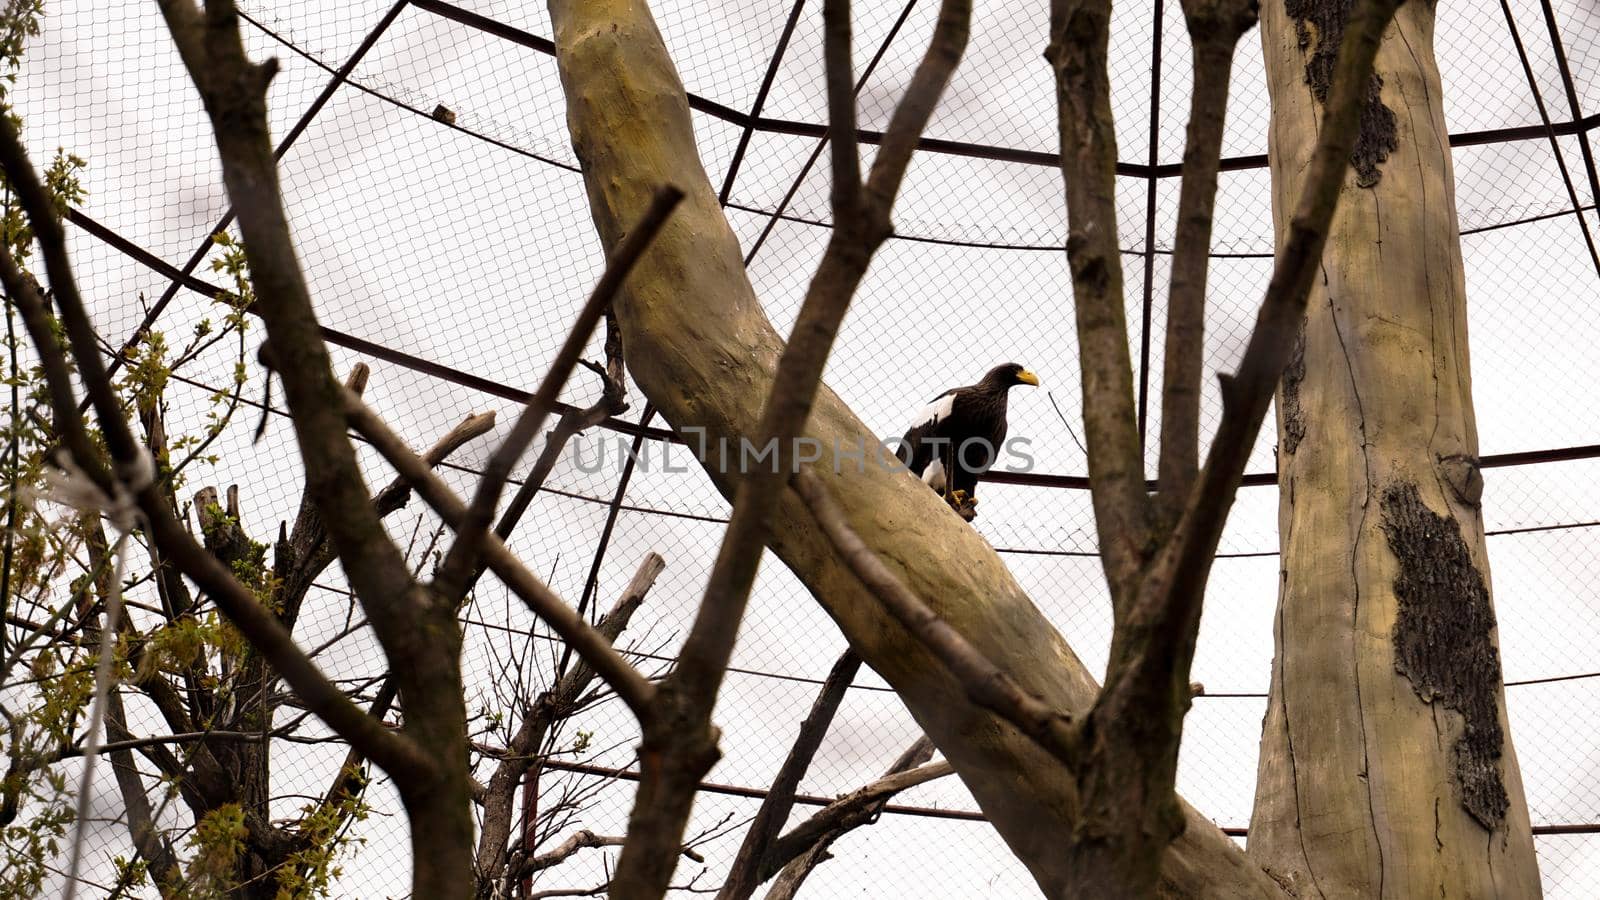 White-tailed eagle in a zoo cage. Aviary for birds with trees. A bird sitting on a branch